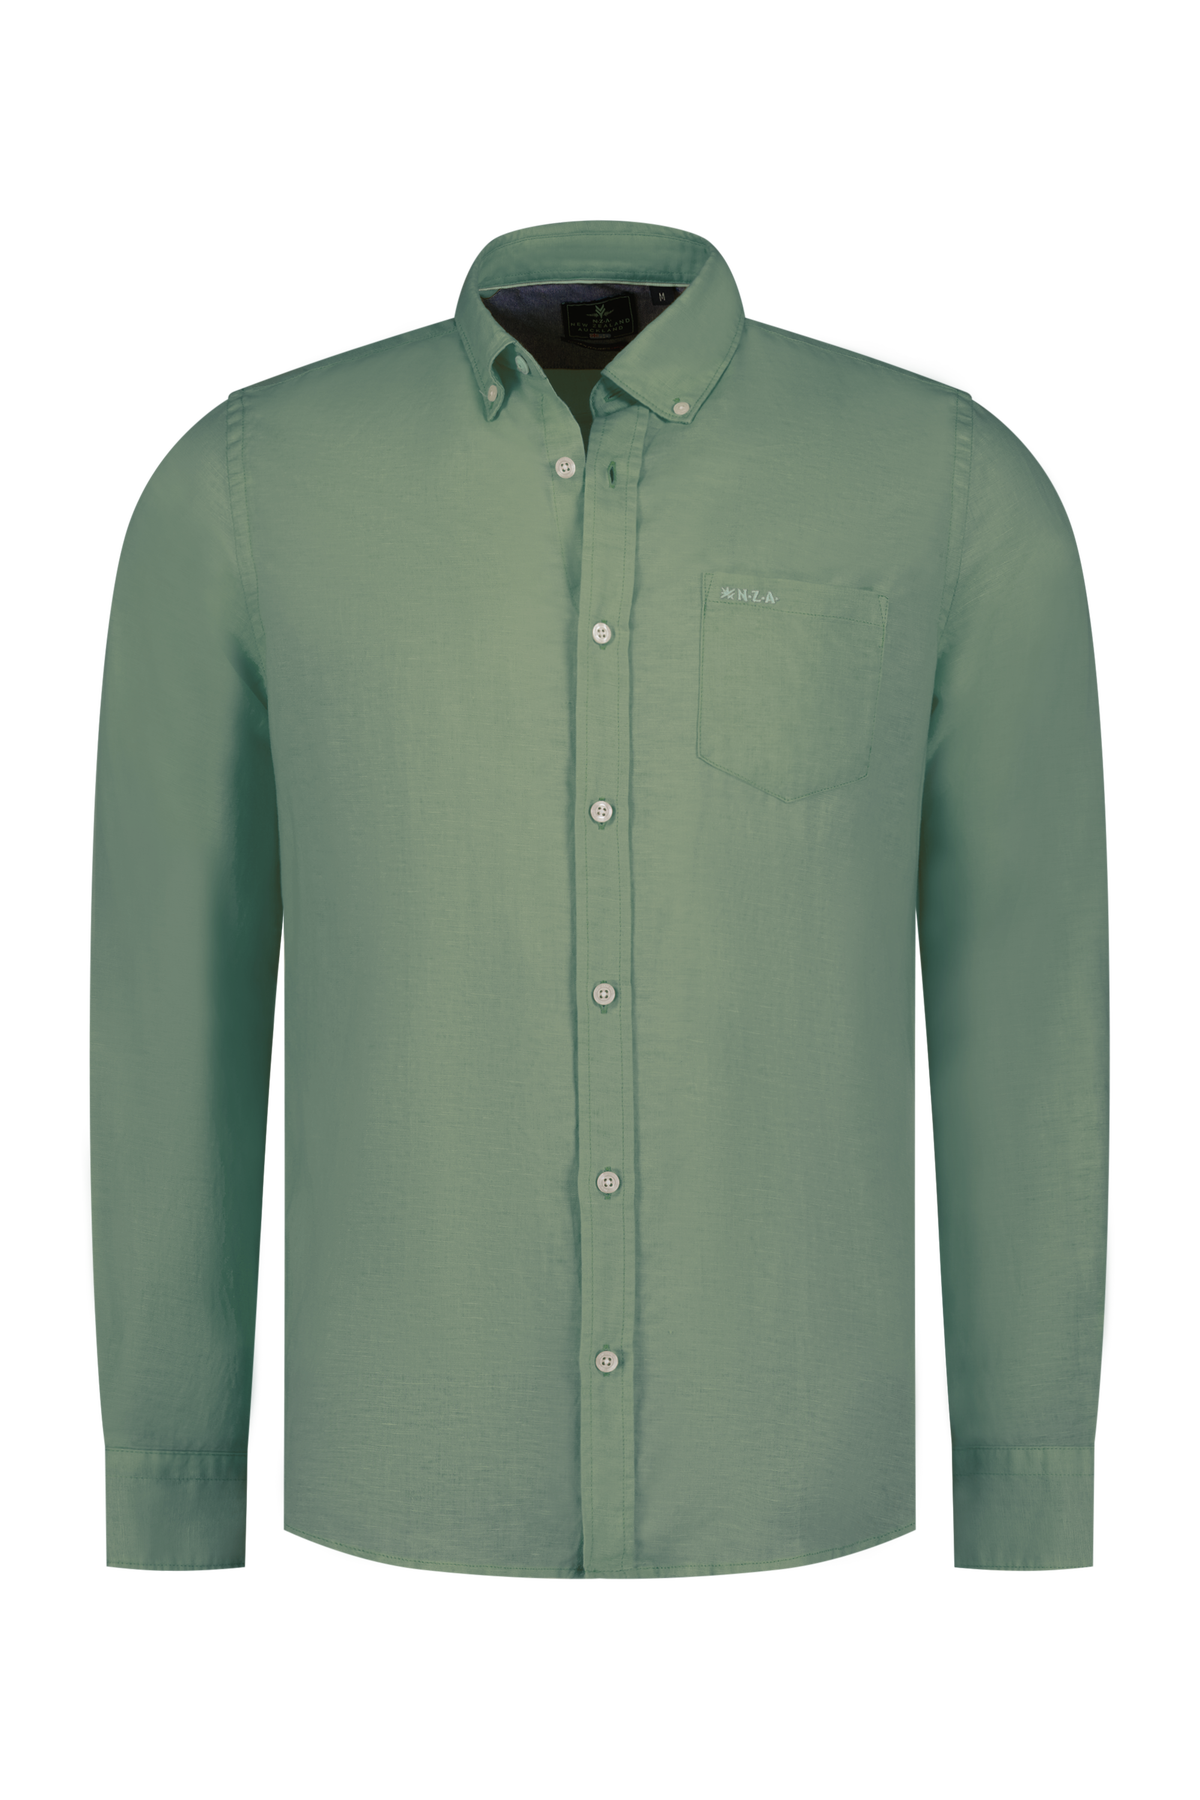 Plain linen shirt in many colors - Mellow Army